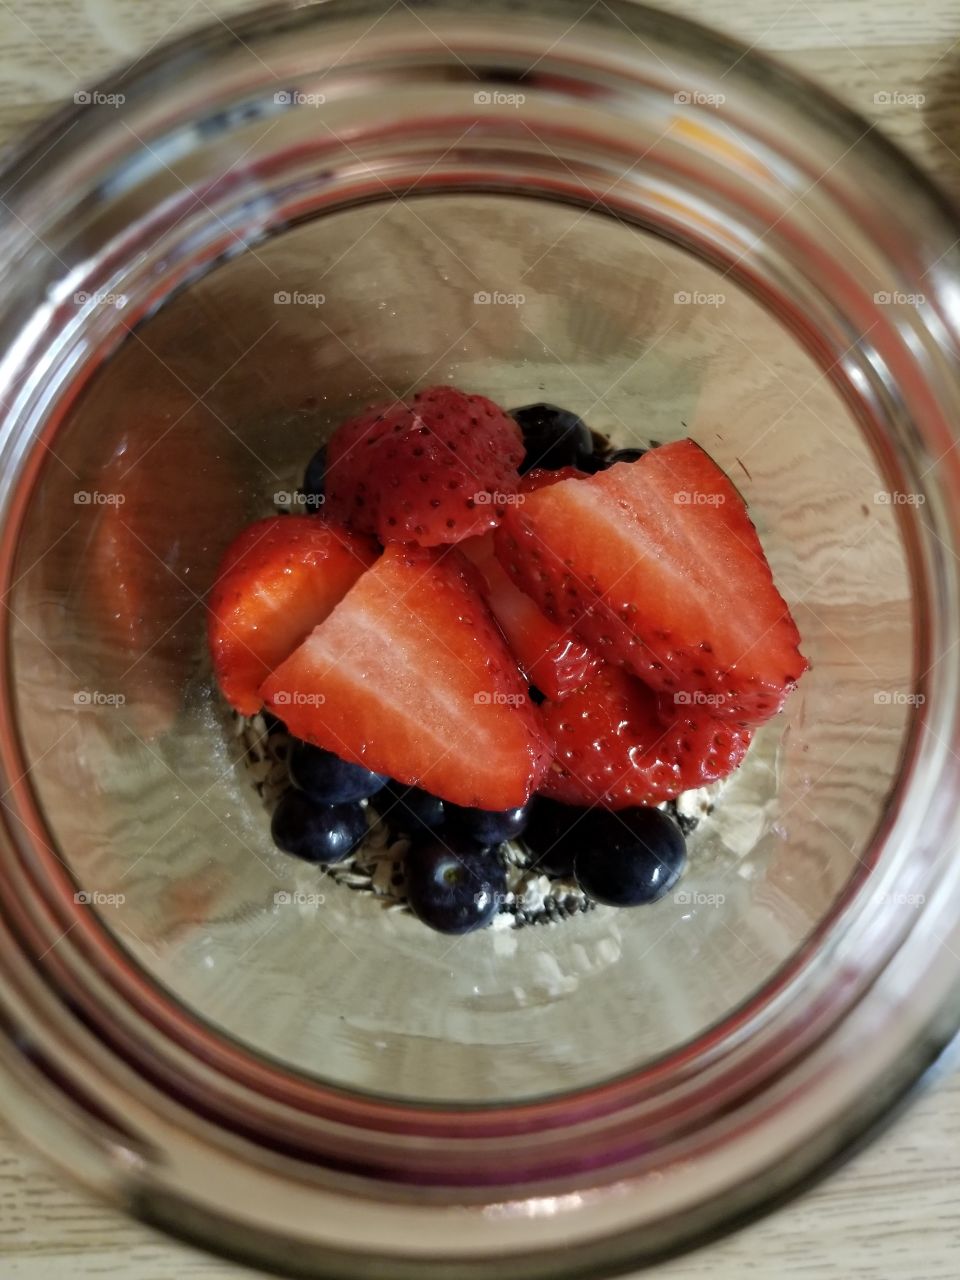 Strawberries and Blueberries in a Mason jar with oats almond milk and chia seeds. Overnight oats at its yummiest!!